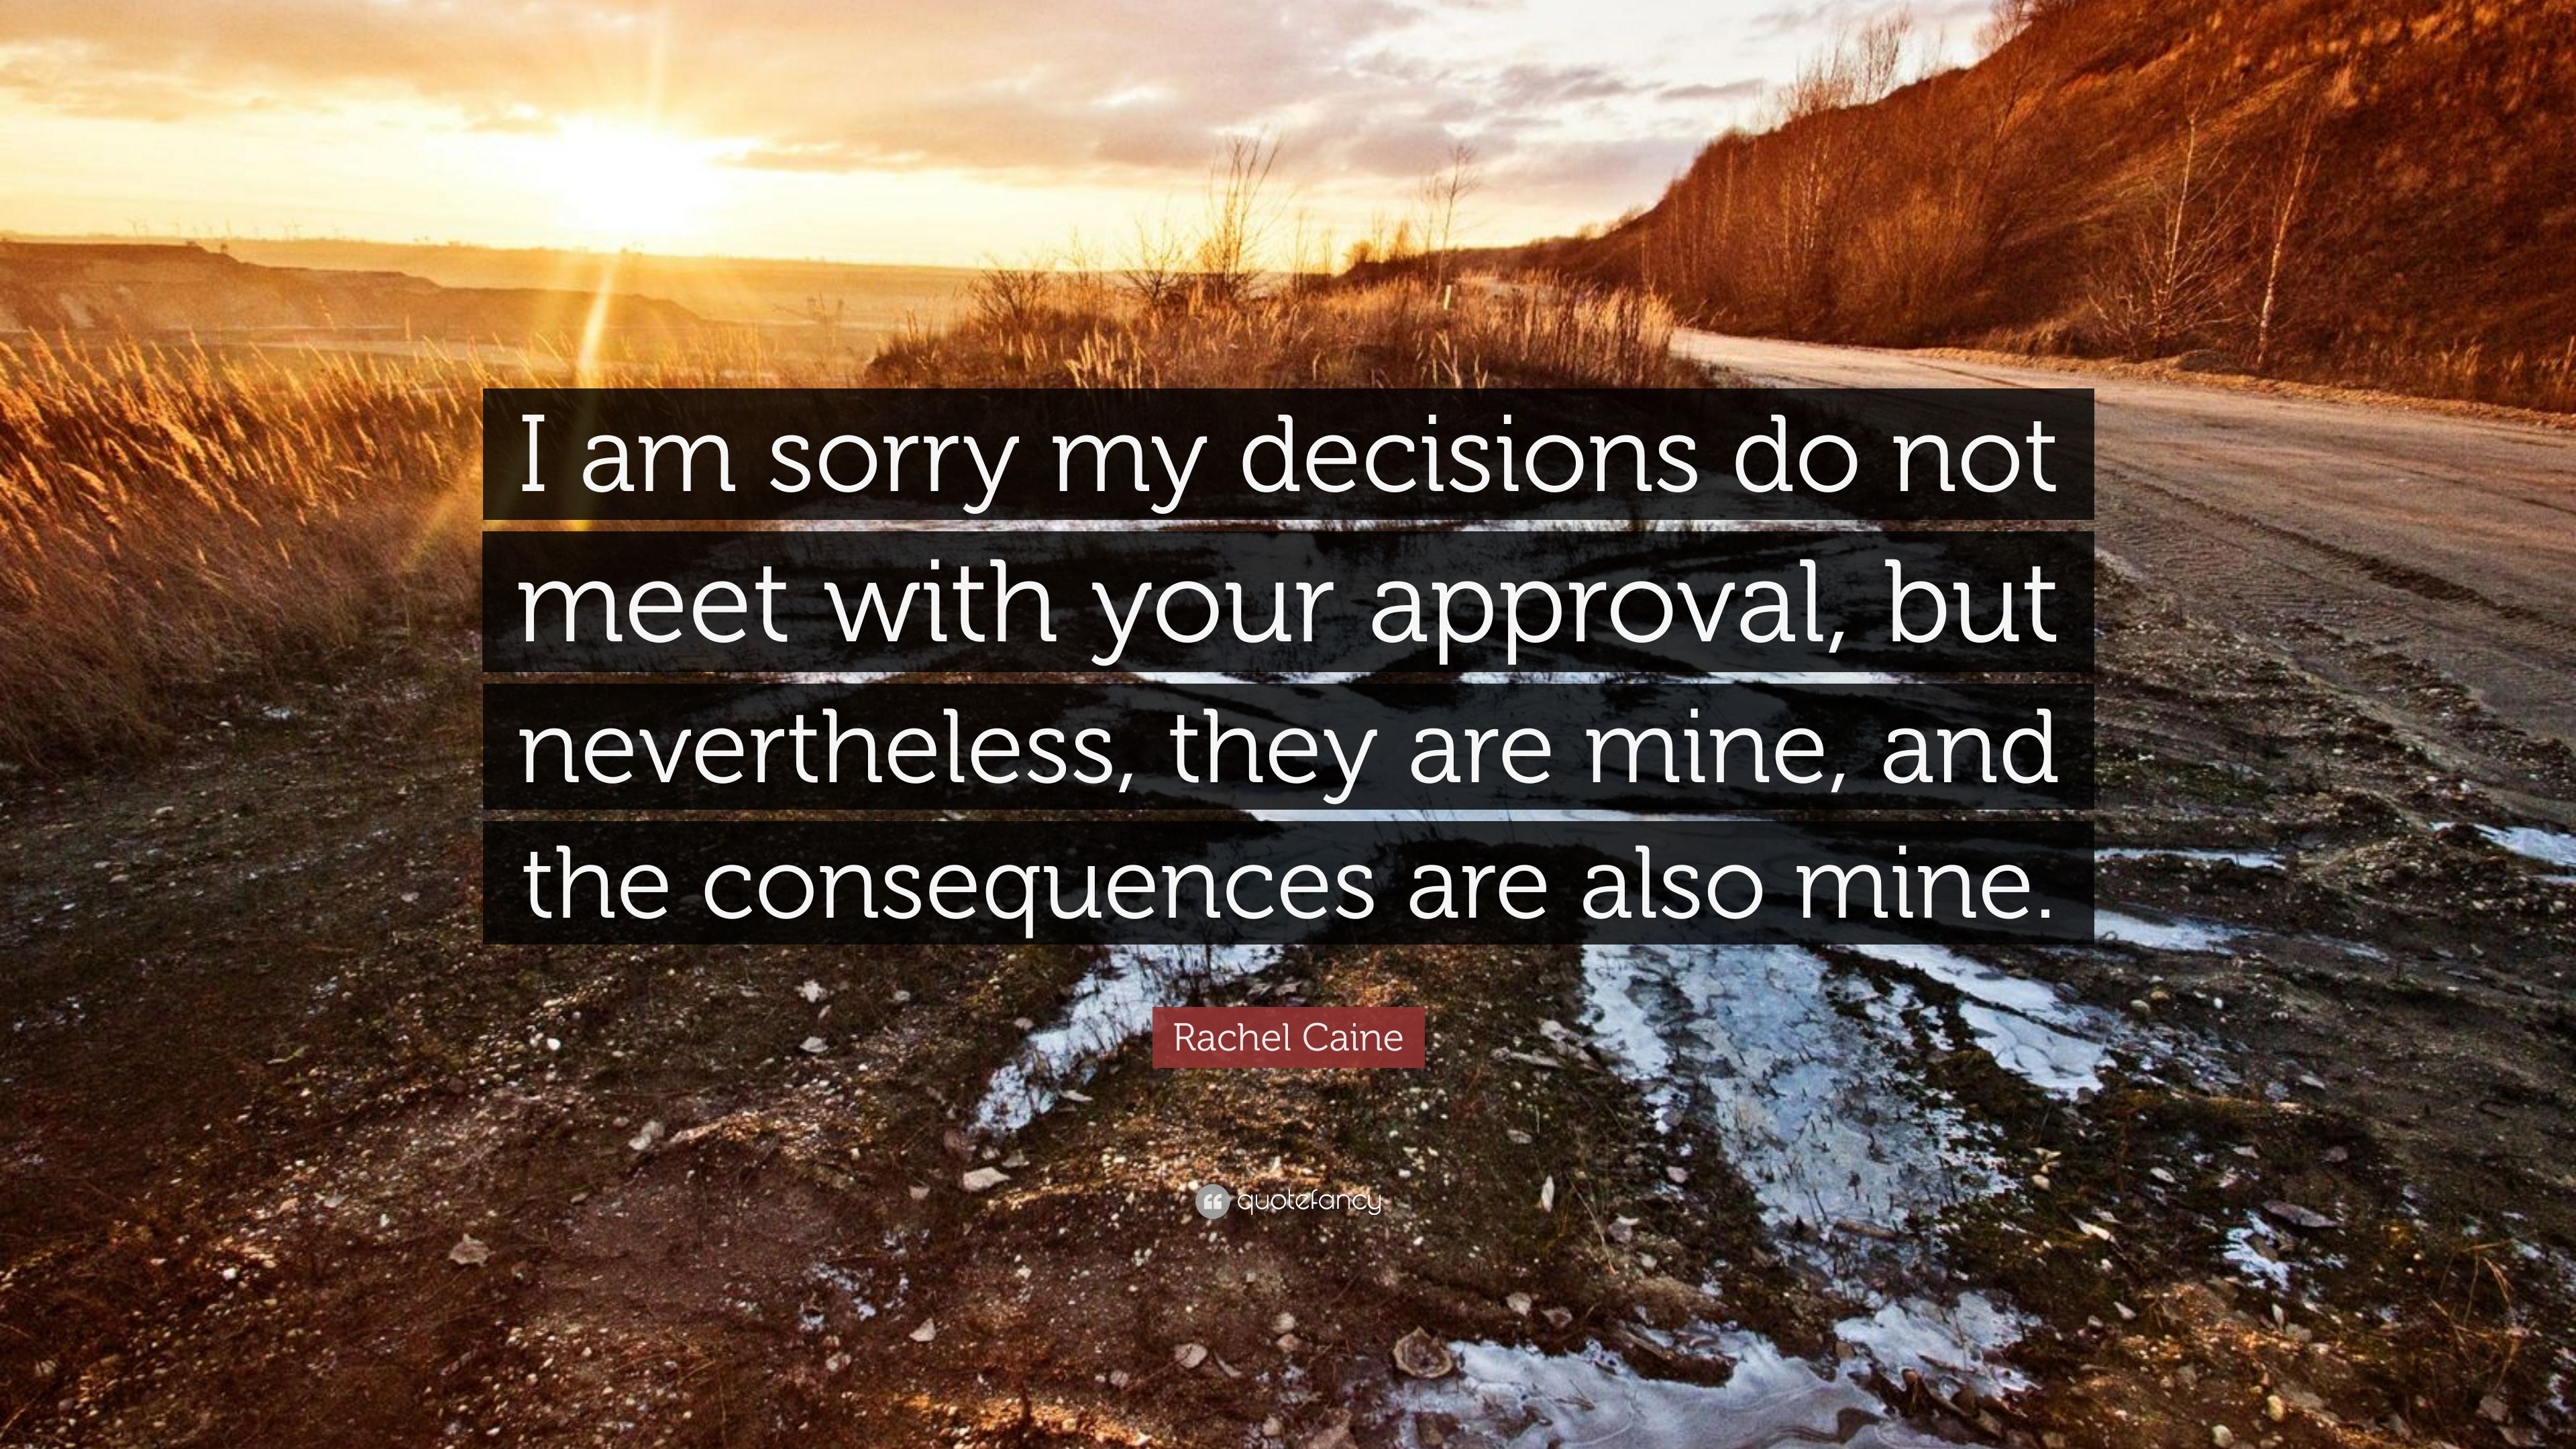 Rachel Caine Quote: “I am sorry my decisions do not meet with your